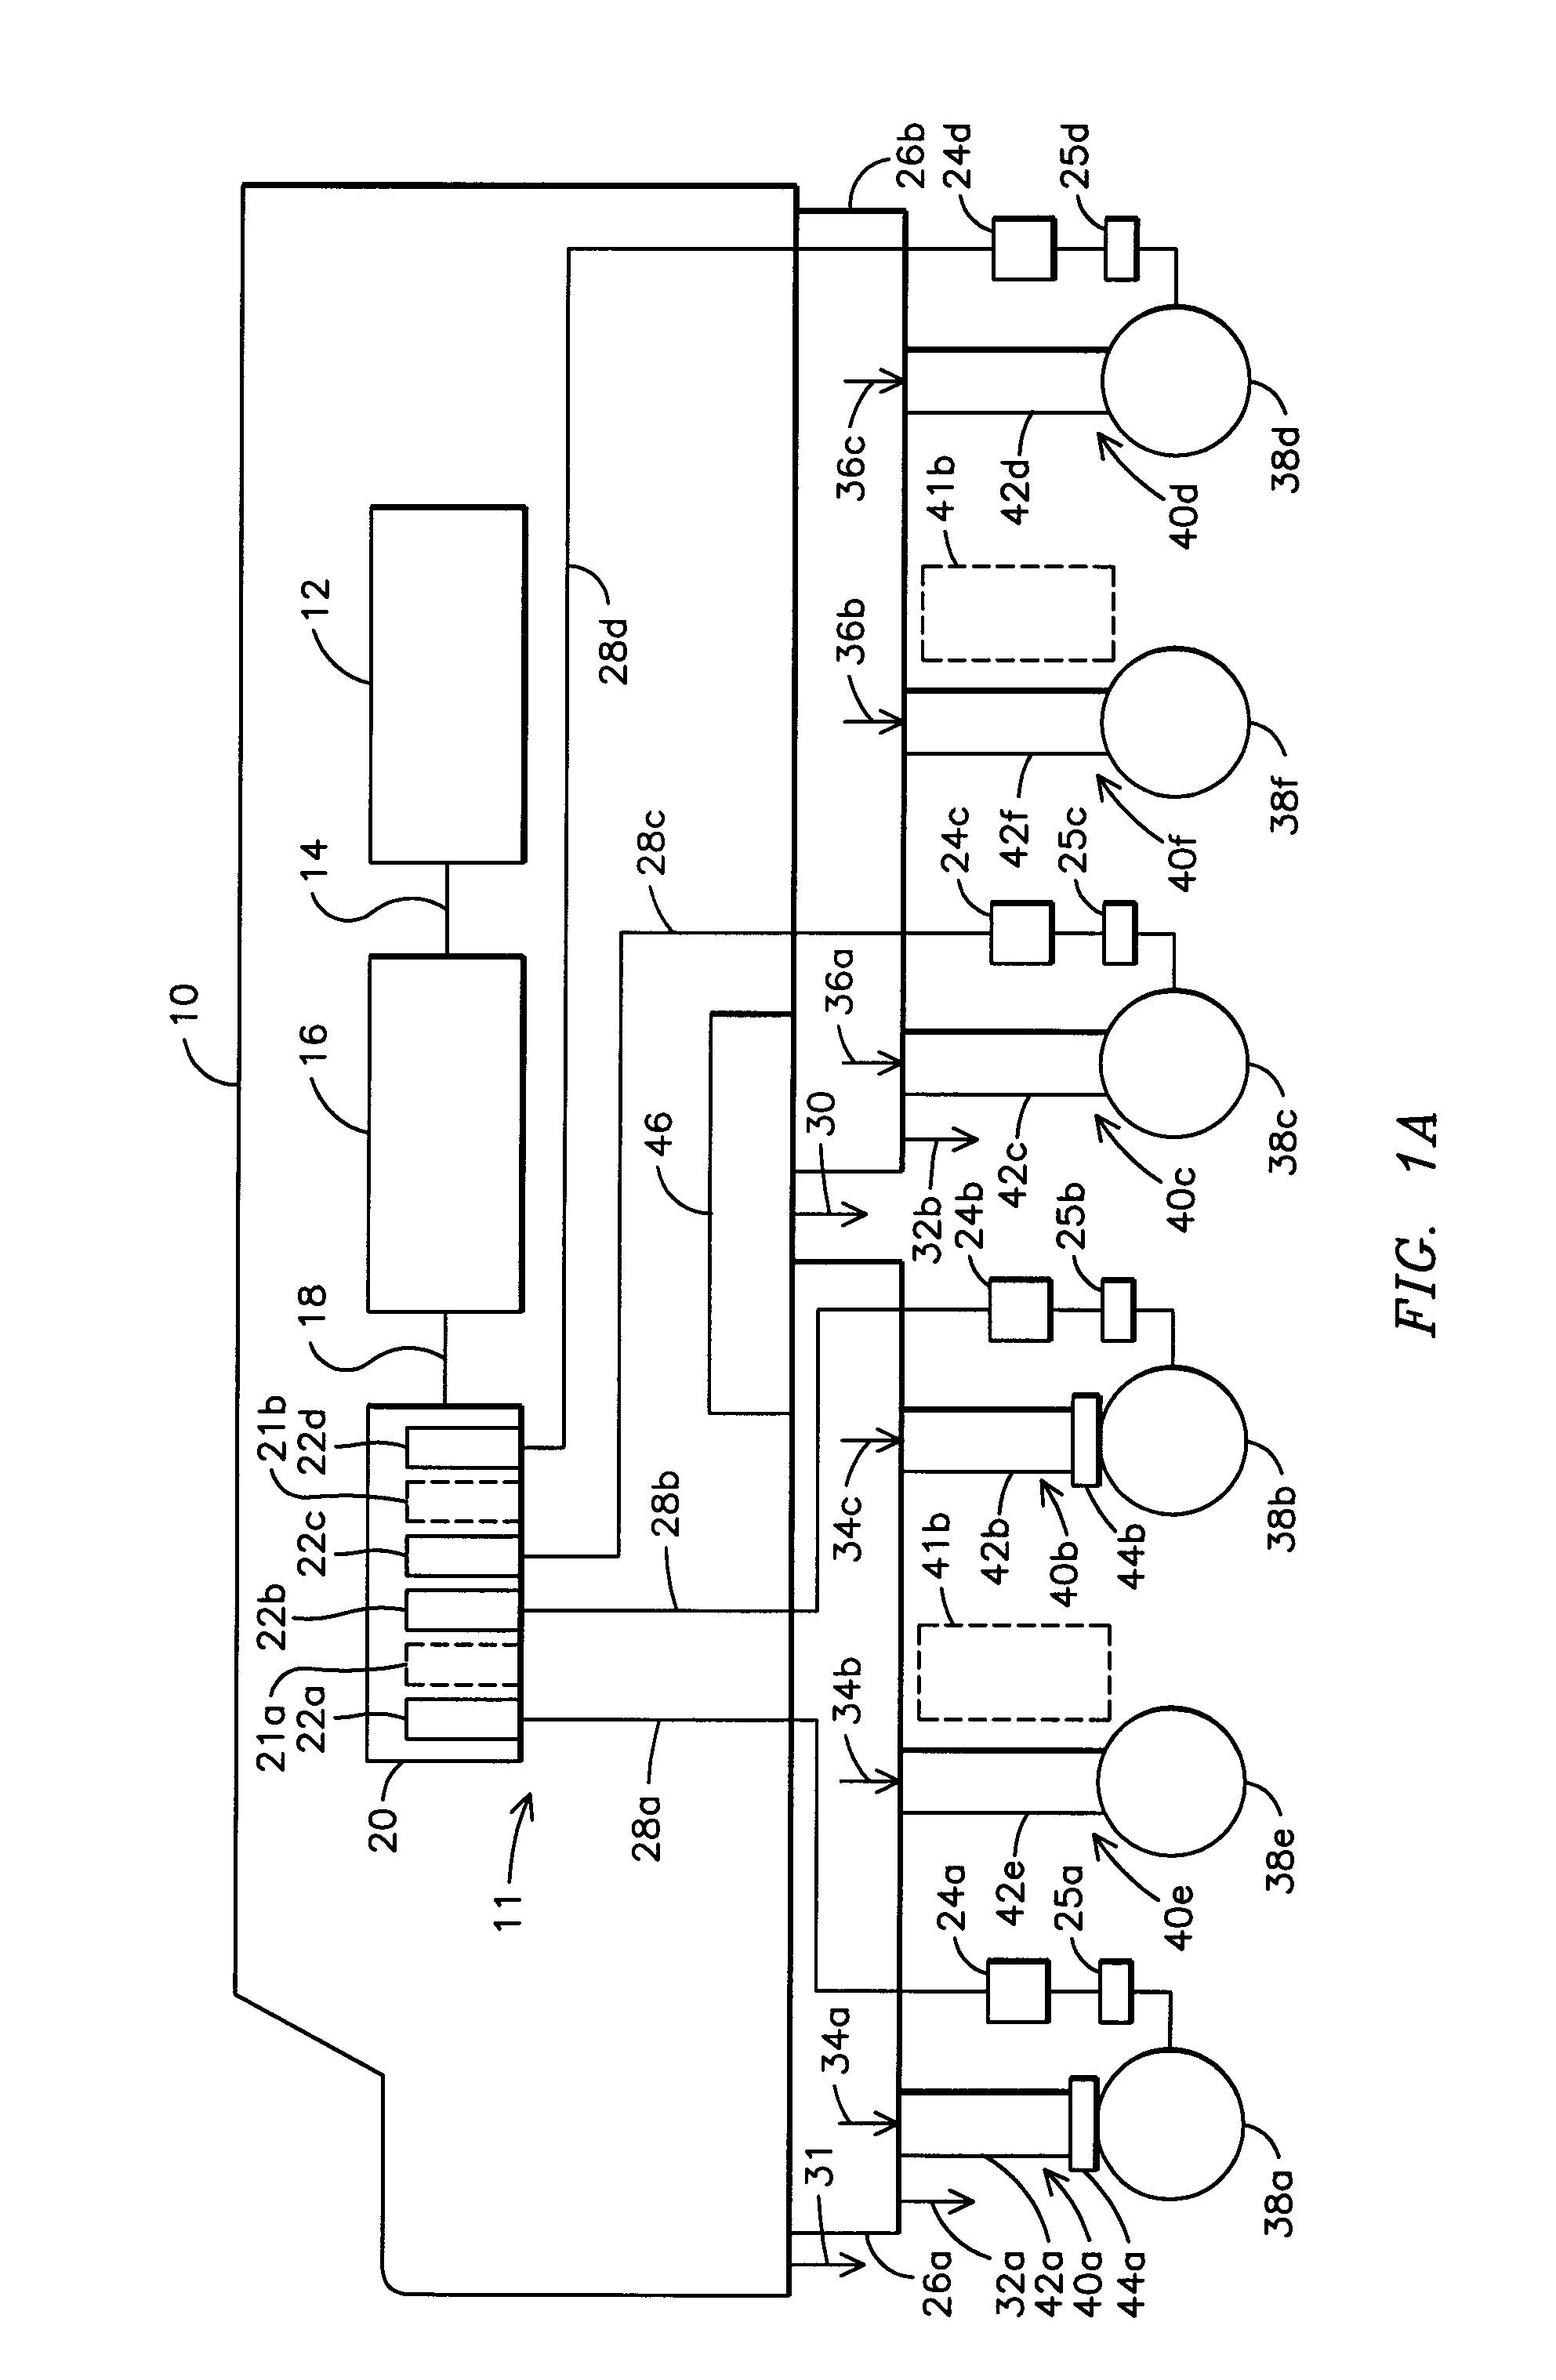 Locomotive Truck and Method for Distributing Weight Asymmetrically to Axles of the Truck